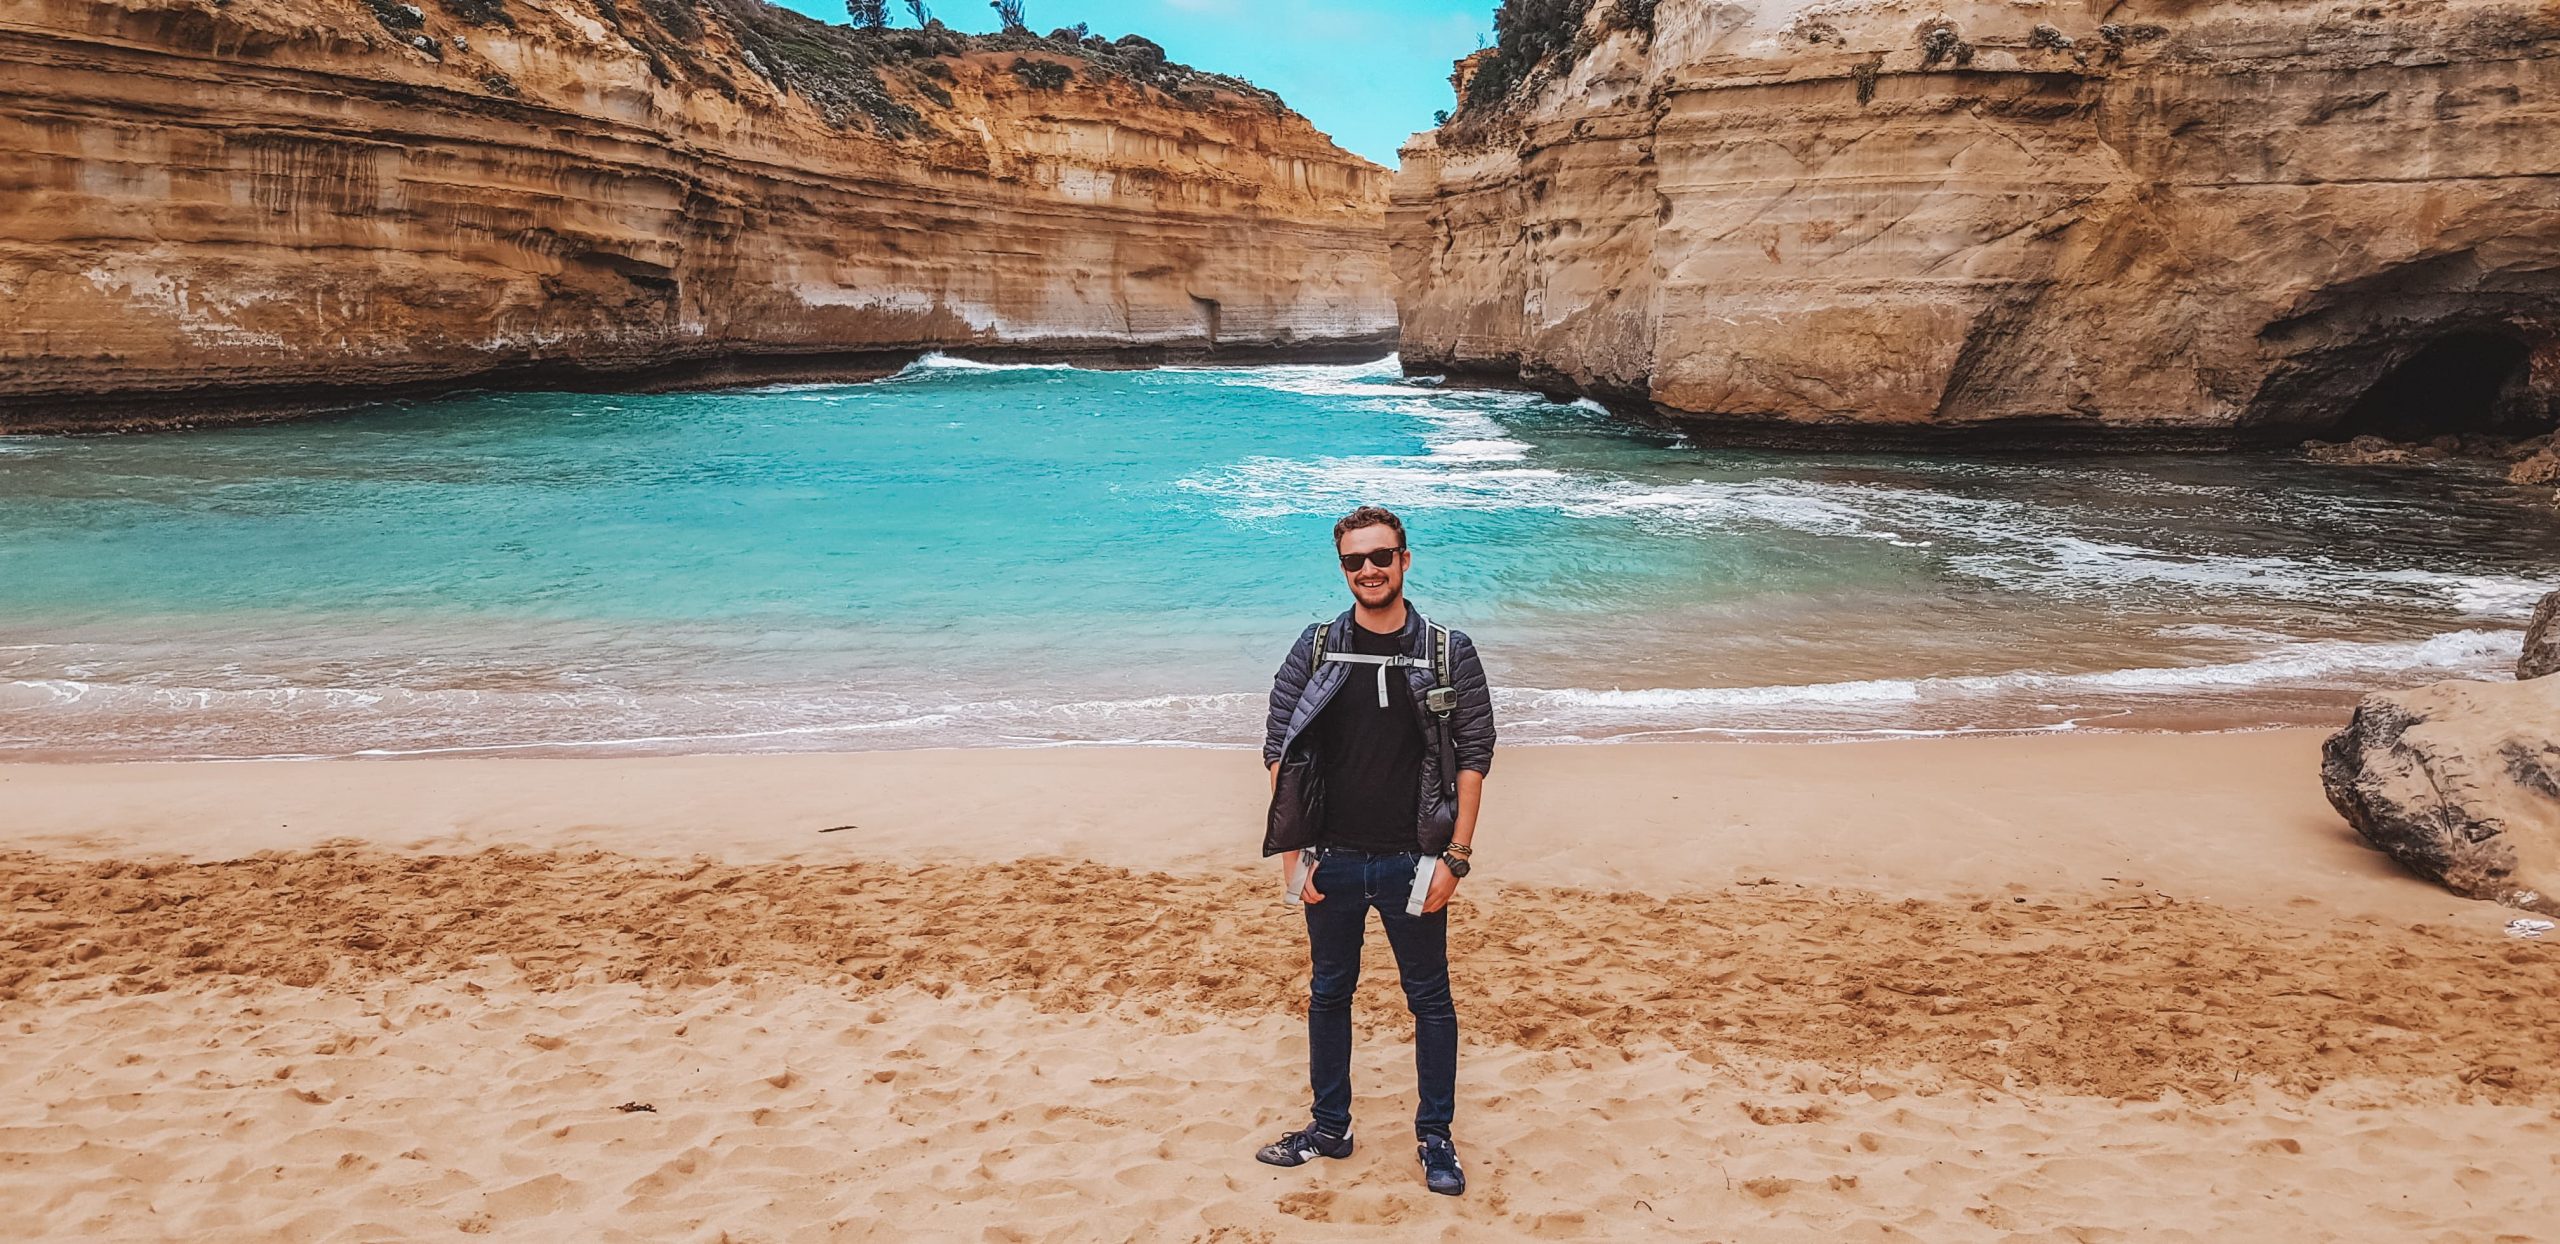 Brad at Loch Ard Gorge in Australia on a tour of the Great Ocean Road